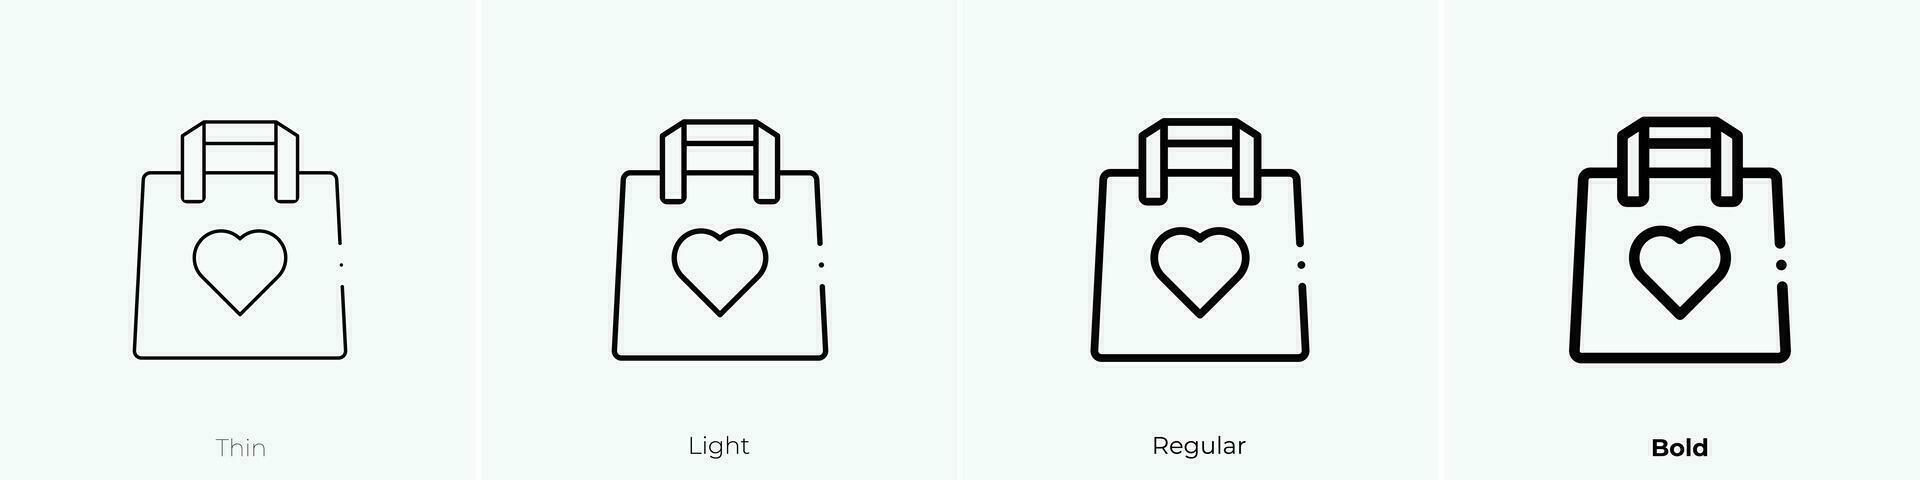 shopping bag icon. Thin, Light, Regular And Bold style design isolated on white background vector